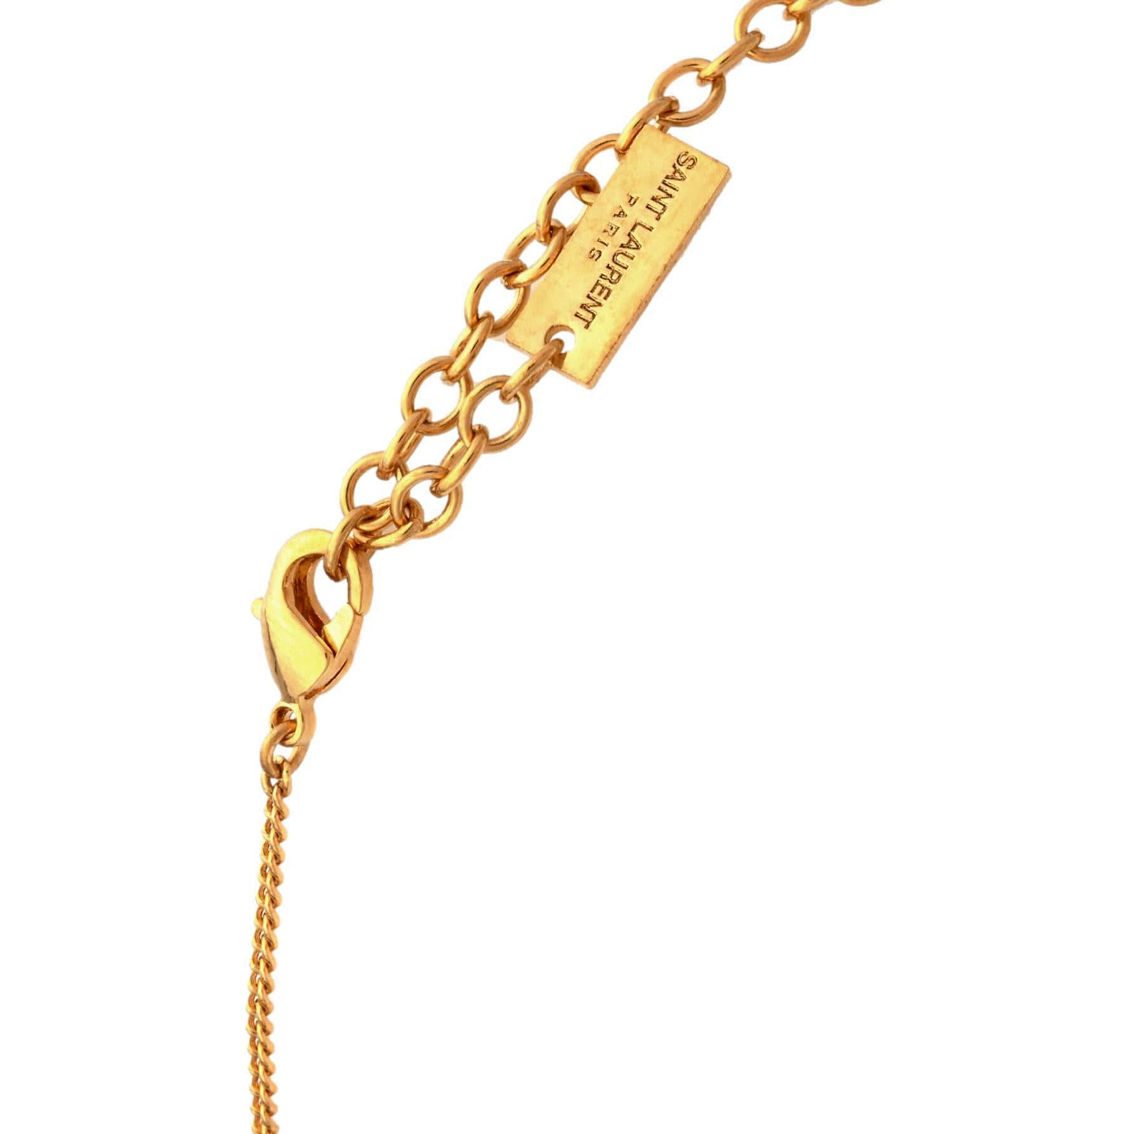 Saint Laurent Military Tag Pendant Necklace Brass Gold (New) - Image 4 of 4